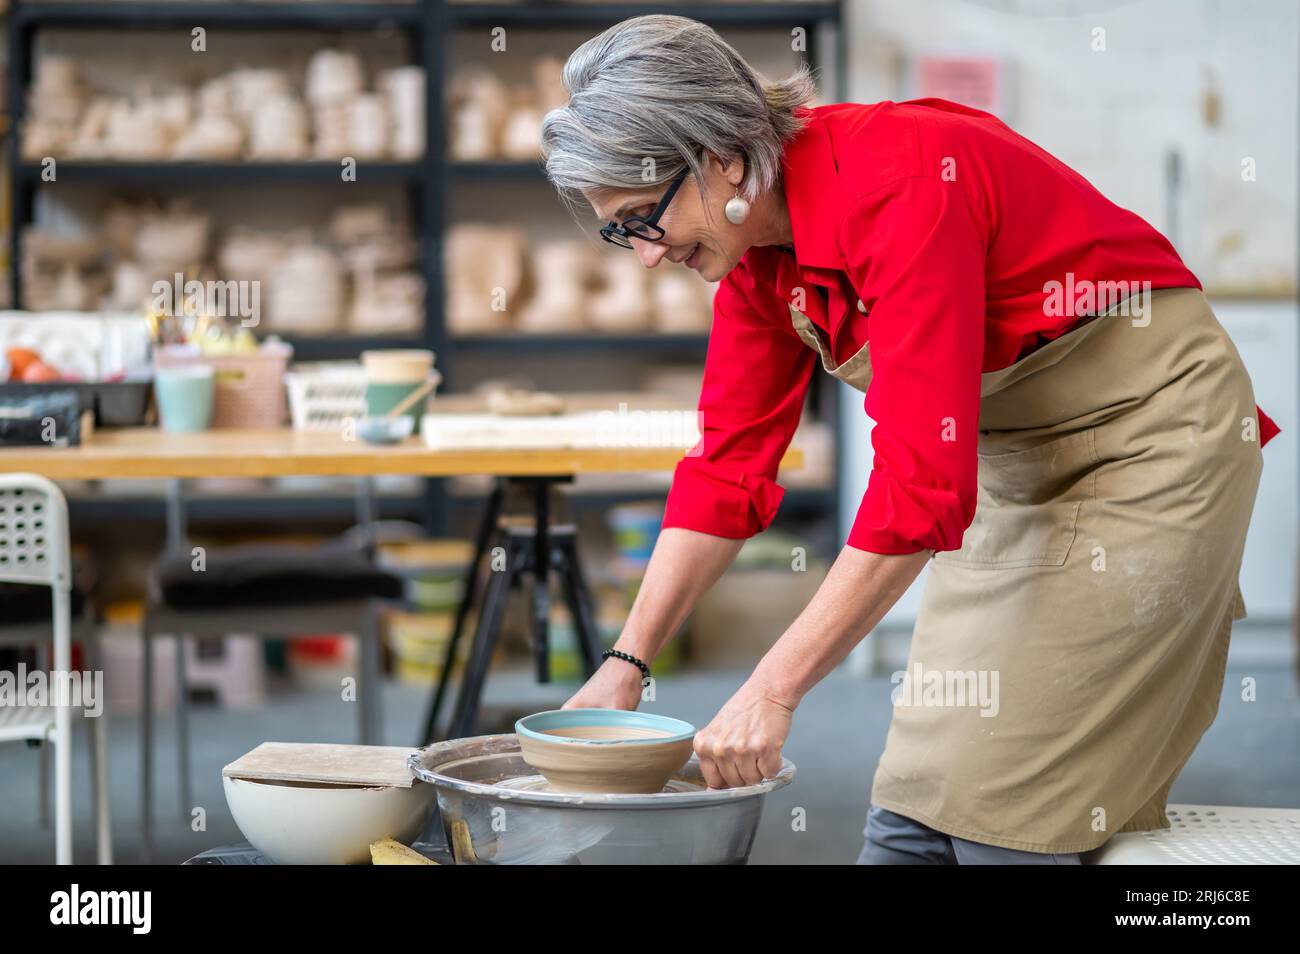 Woman potter taking finished plate from pottery wheel, making earthenware. Stock Photo